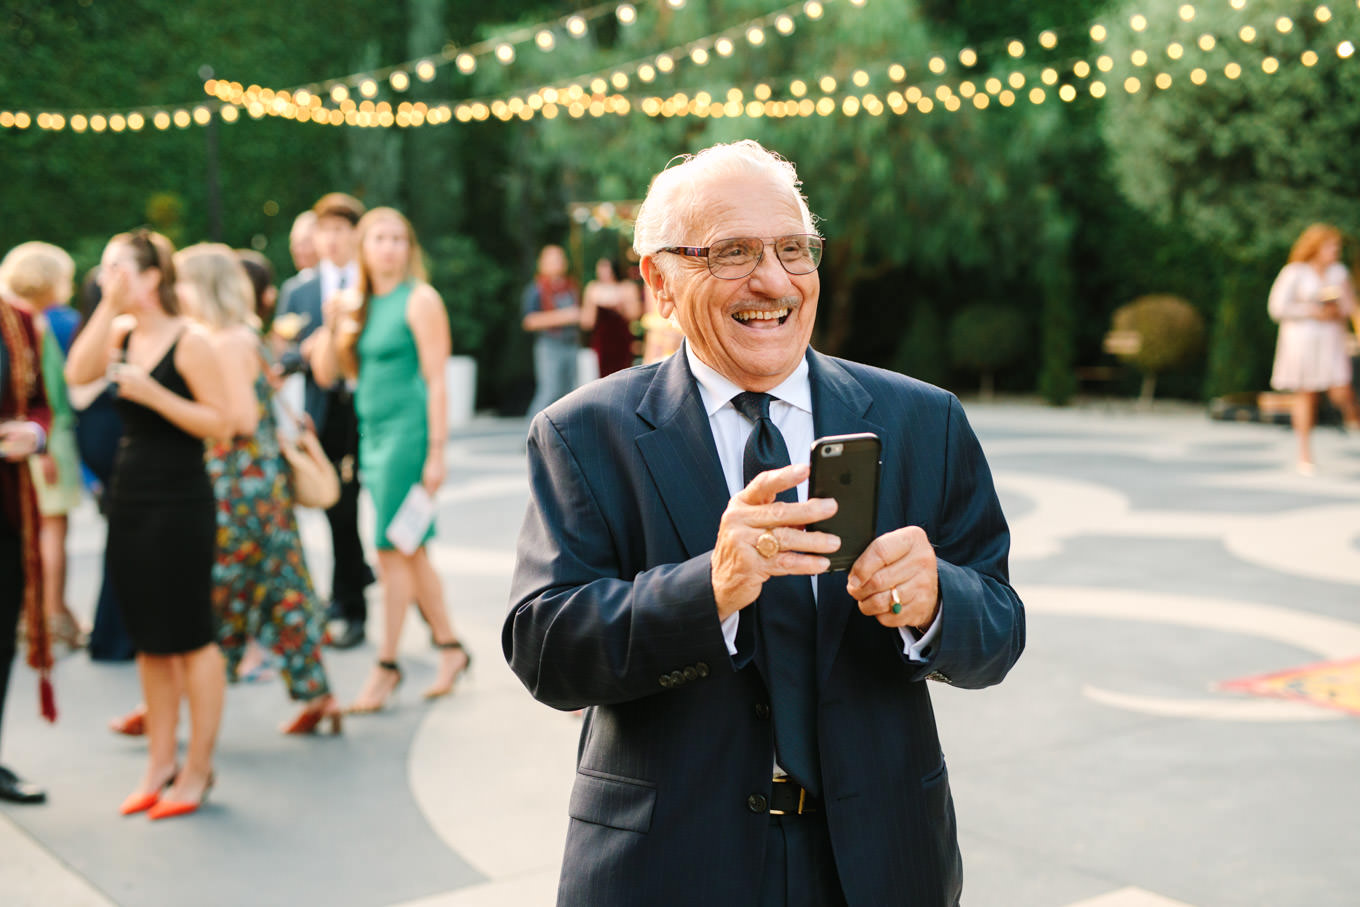 Candid of groom's grandfather laughing. Two Disney artists create a unique and colorful Indian Fusion wedding at The Fig House Los Angeles, featured on Green Wedding Shoes. | Colorful and elevated wedding inspiration for fun-loving couples in Southern California | #indianwedding #indianfusionwedding #thefighouse #losangeleswedding   Source: Mary Costa Photography | Los Angeles